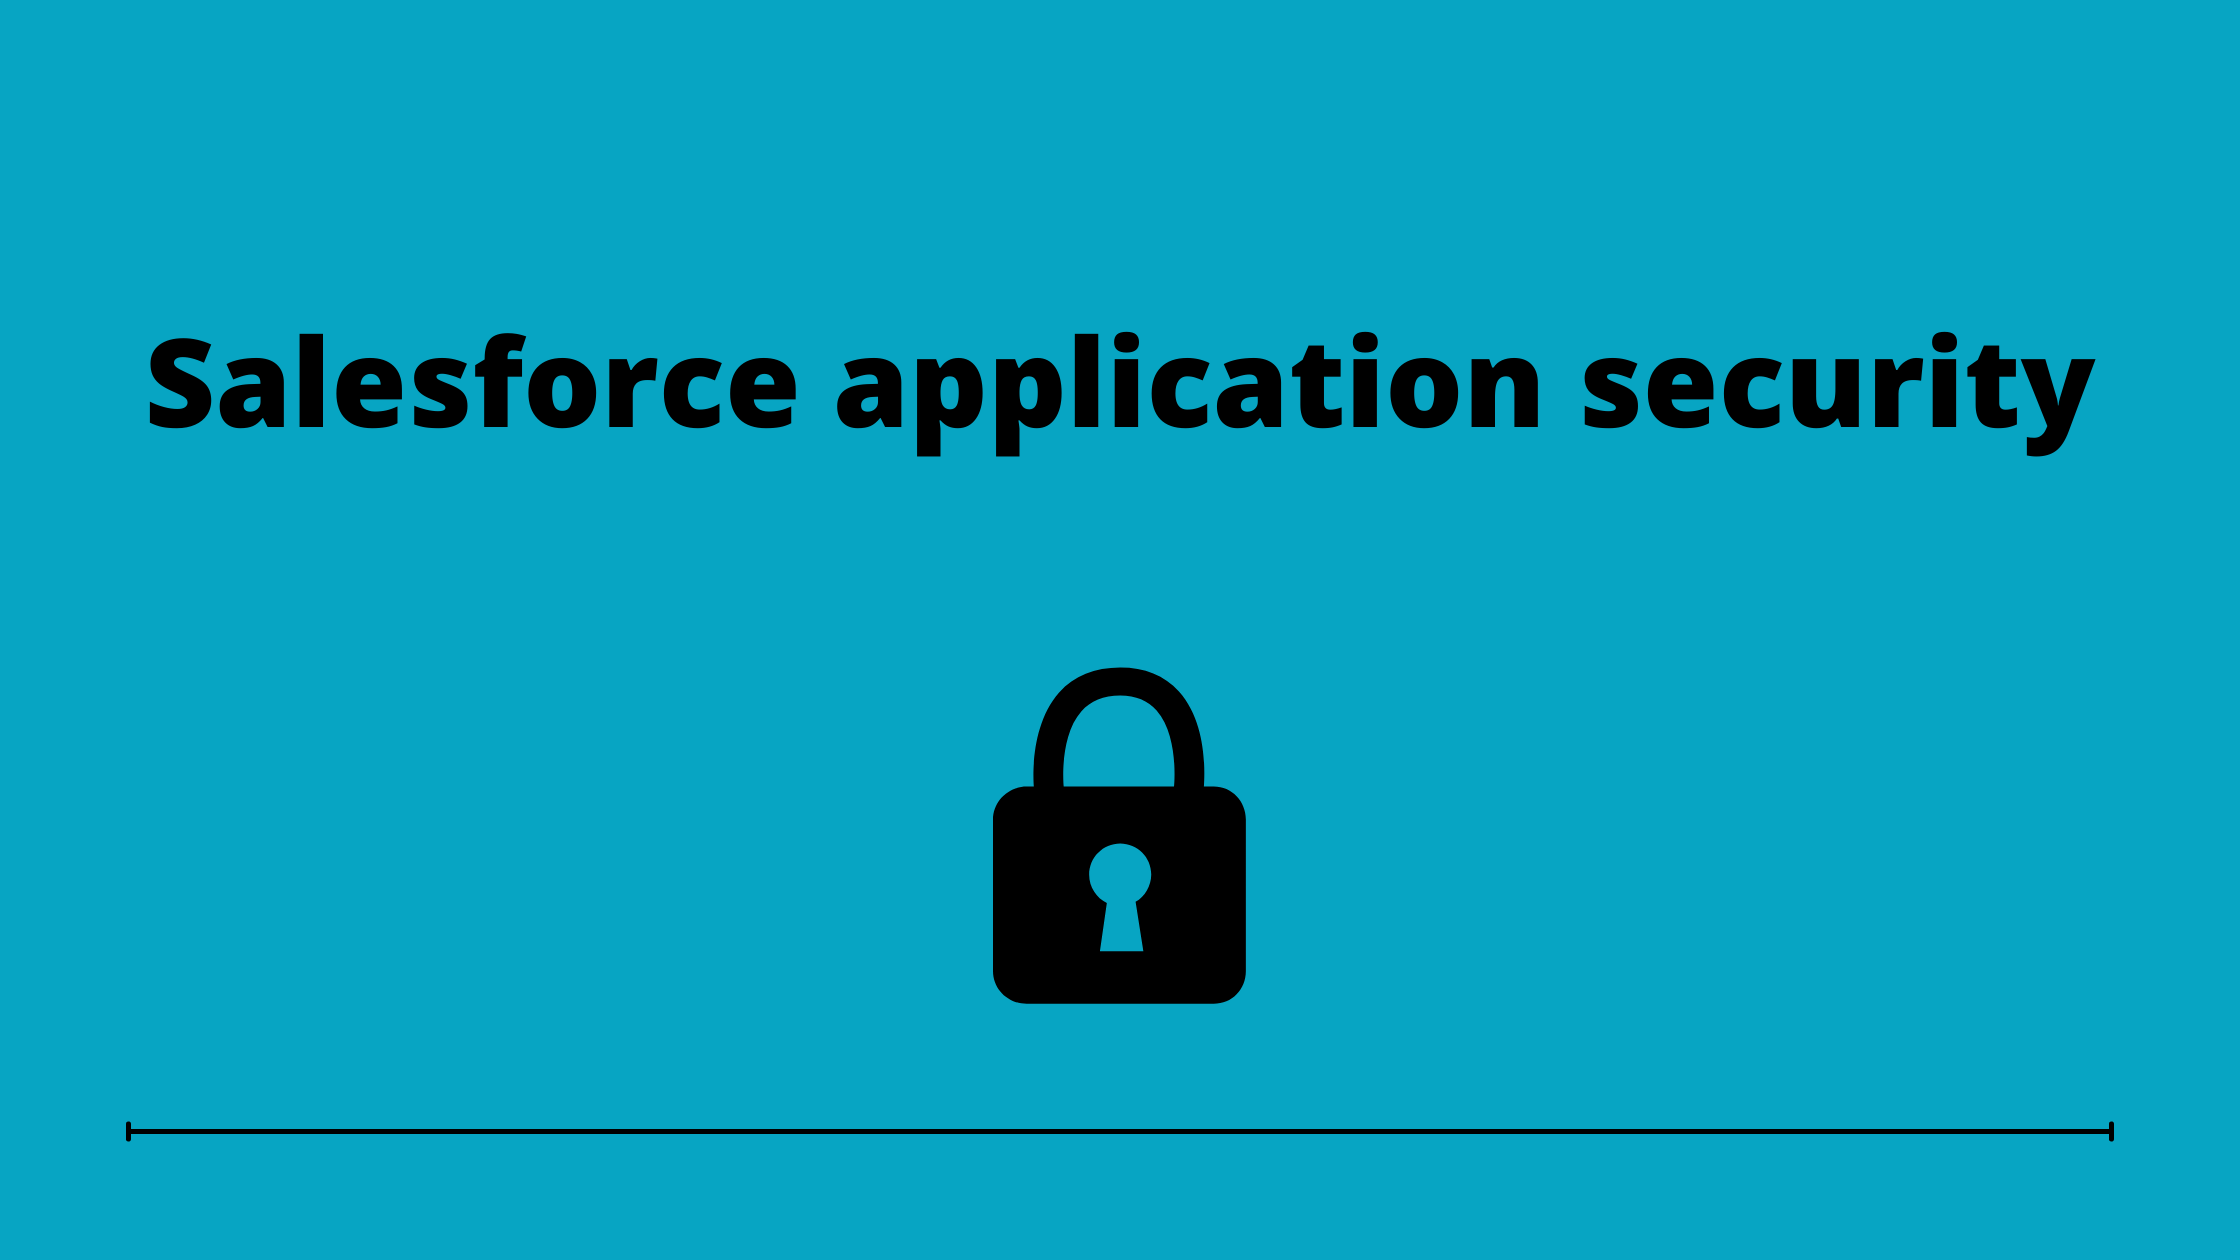 Salesforce application security